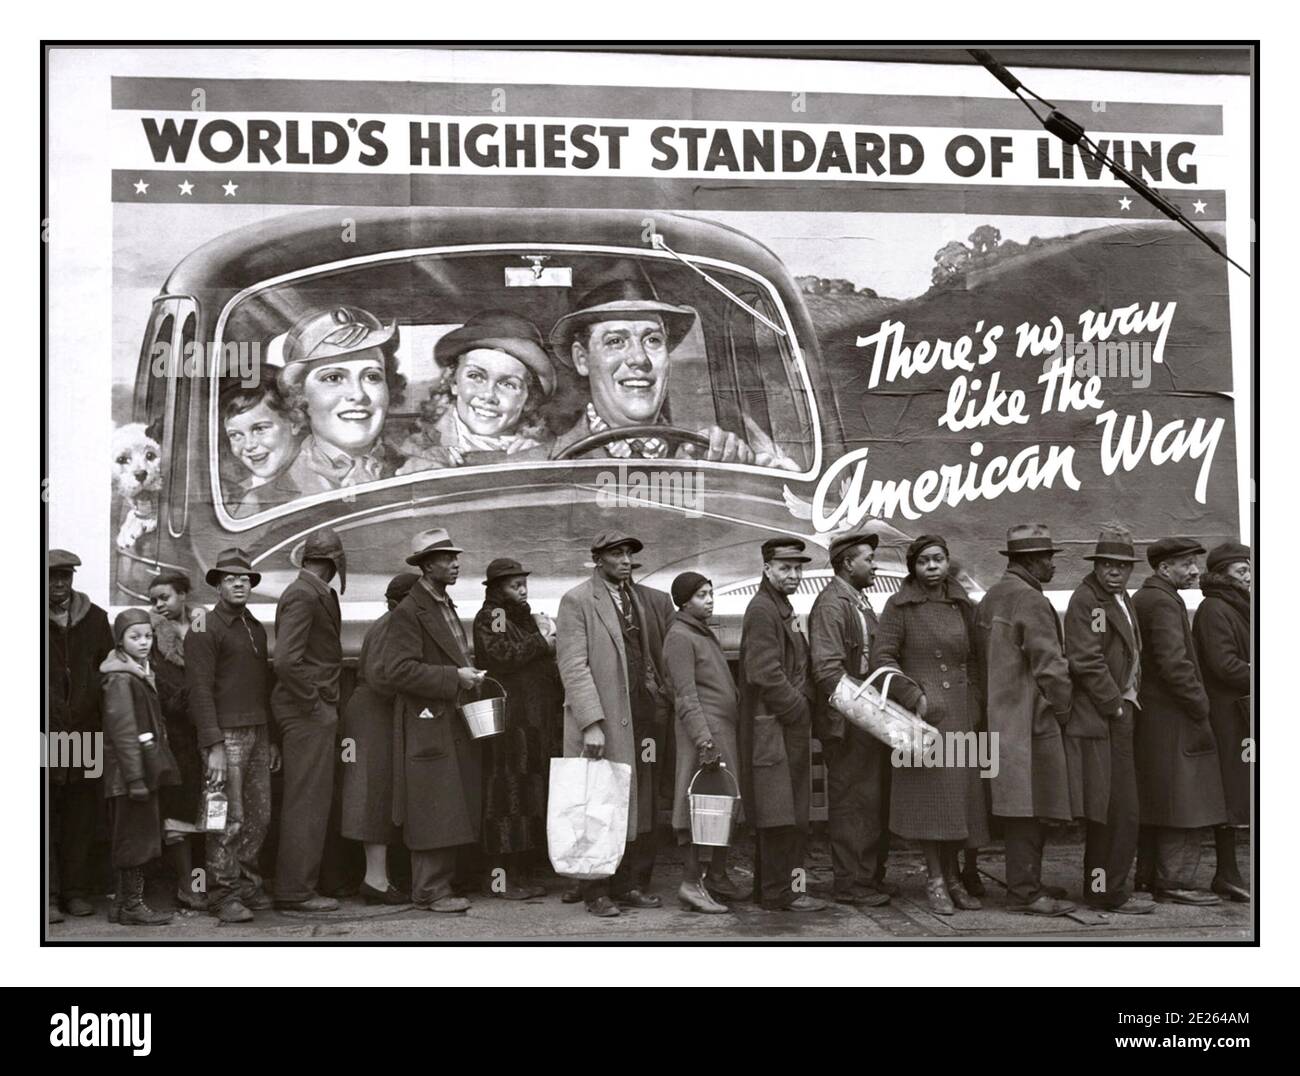 RICH & POOR USA ‘World’s Highest Standard of Living’   Metaphor social insight 1930's Visual contrast between white middle class and black African American poor working class  1937 America USA 'Worlds Highest Standard of Living' on hoarding Stock Photo